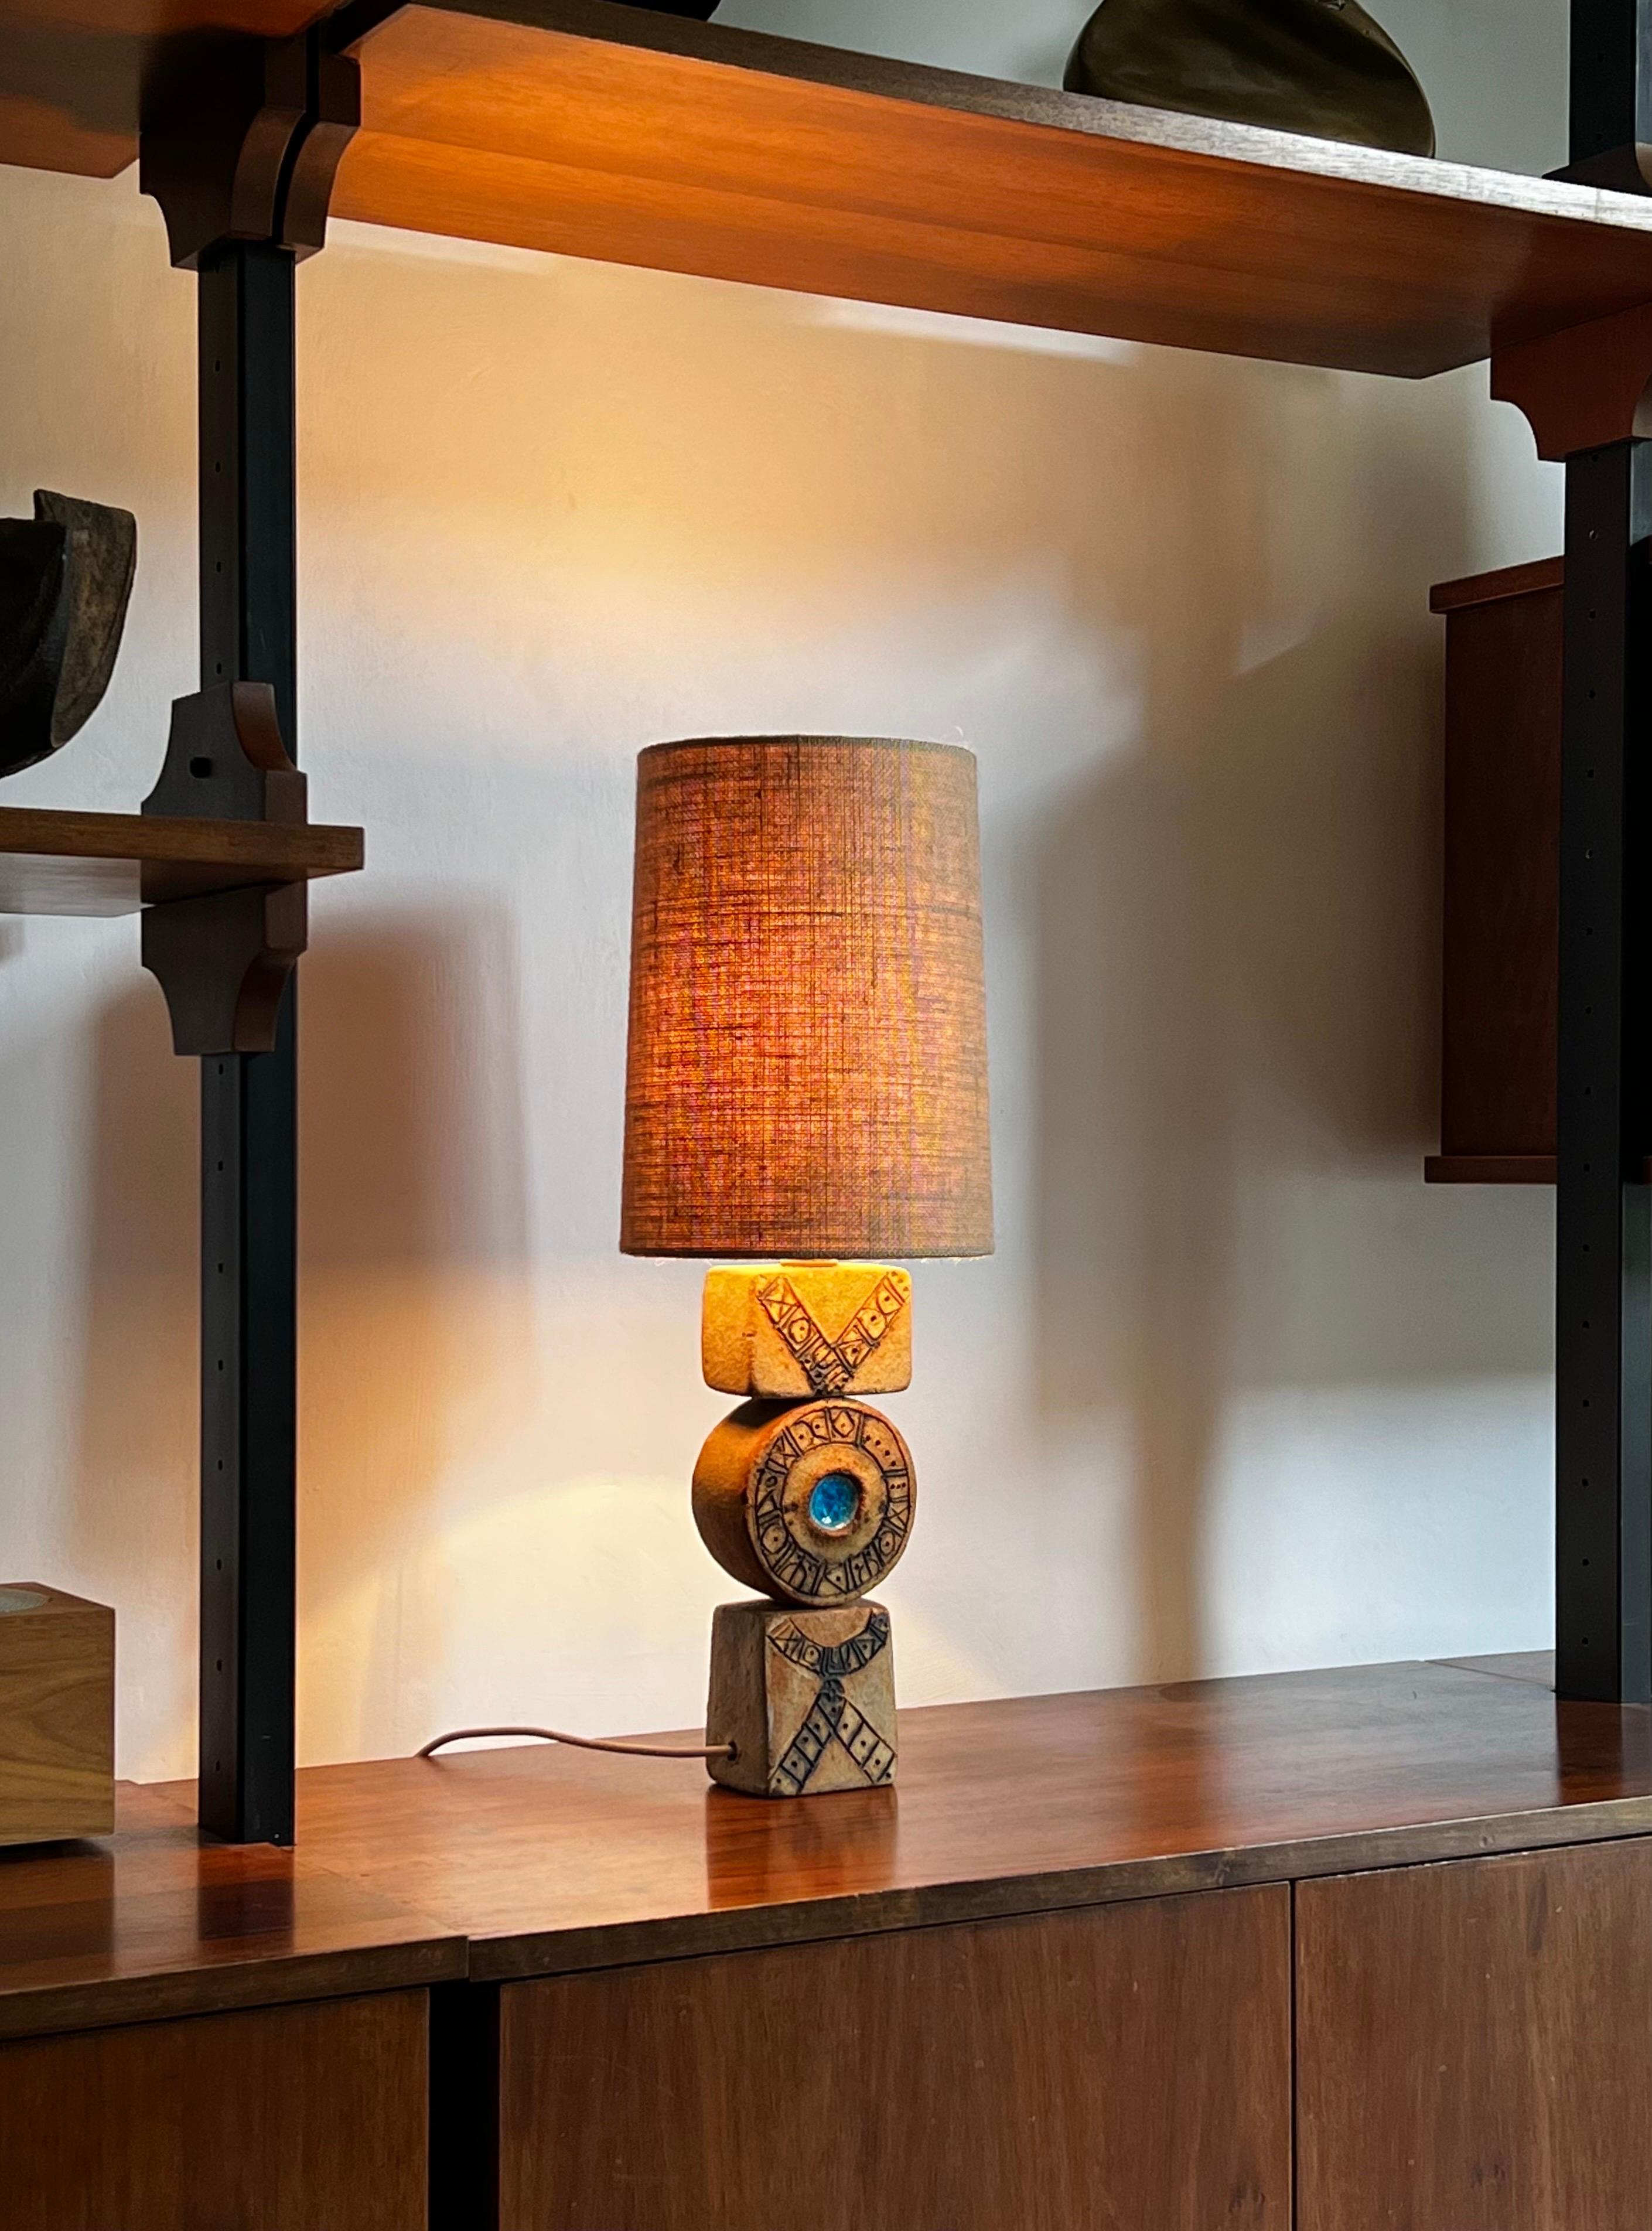 A small table totem lamp by ceramicist Bernard Rooke - double-sided - featuring Rooke's hieroglyphics and blue glass detail. Late 1960s, England.

The lamp is in nice original condition with particularly clear markings and even execution, while